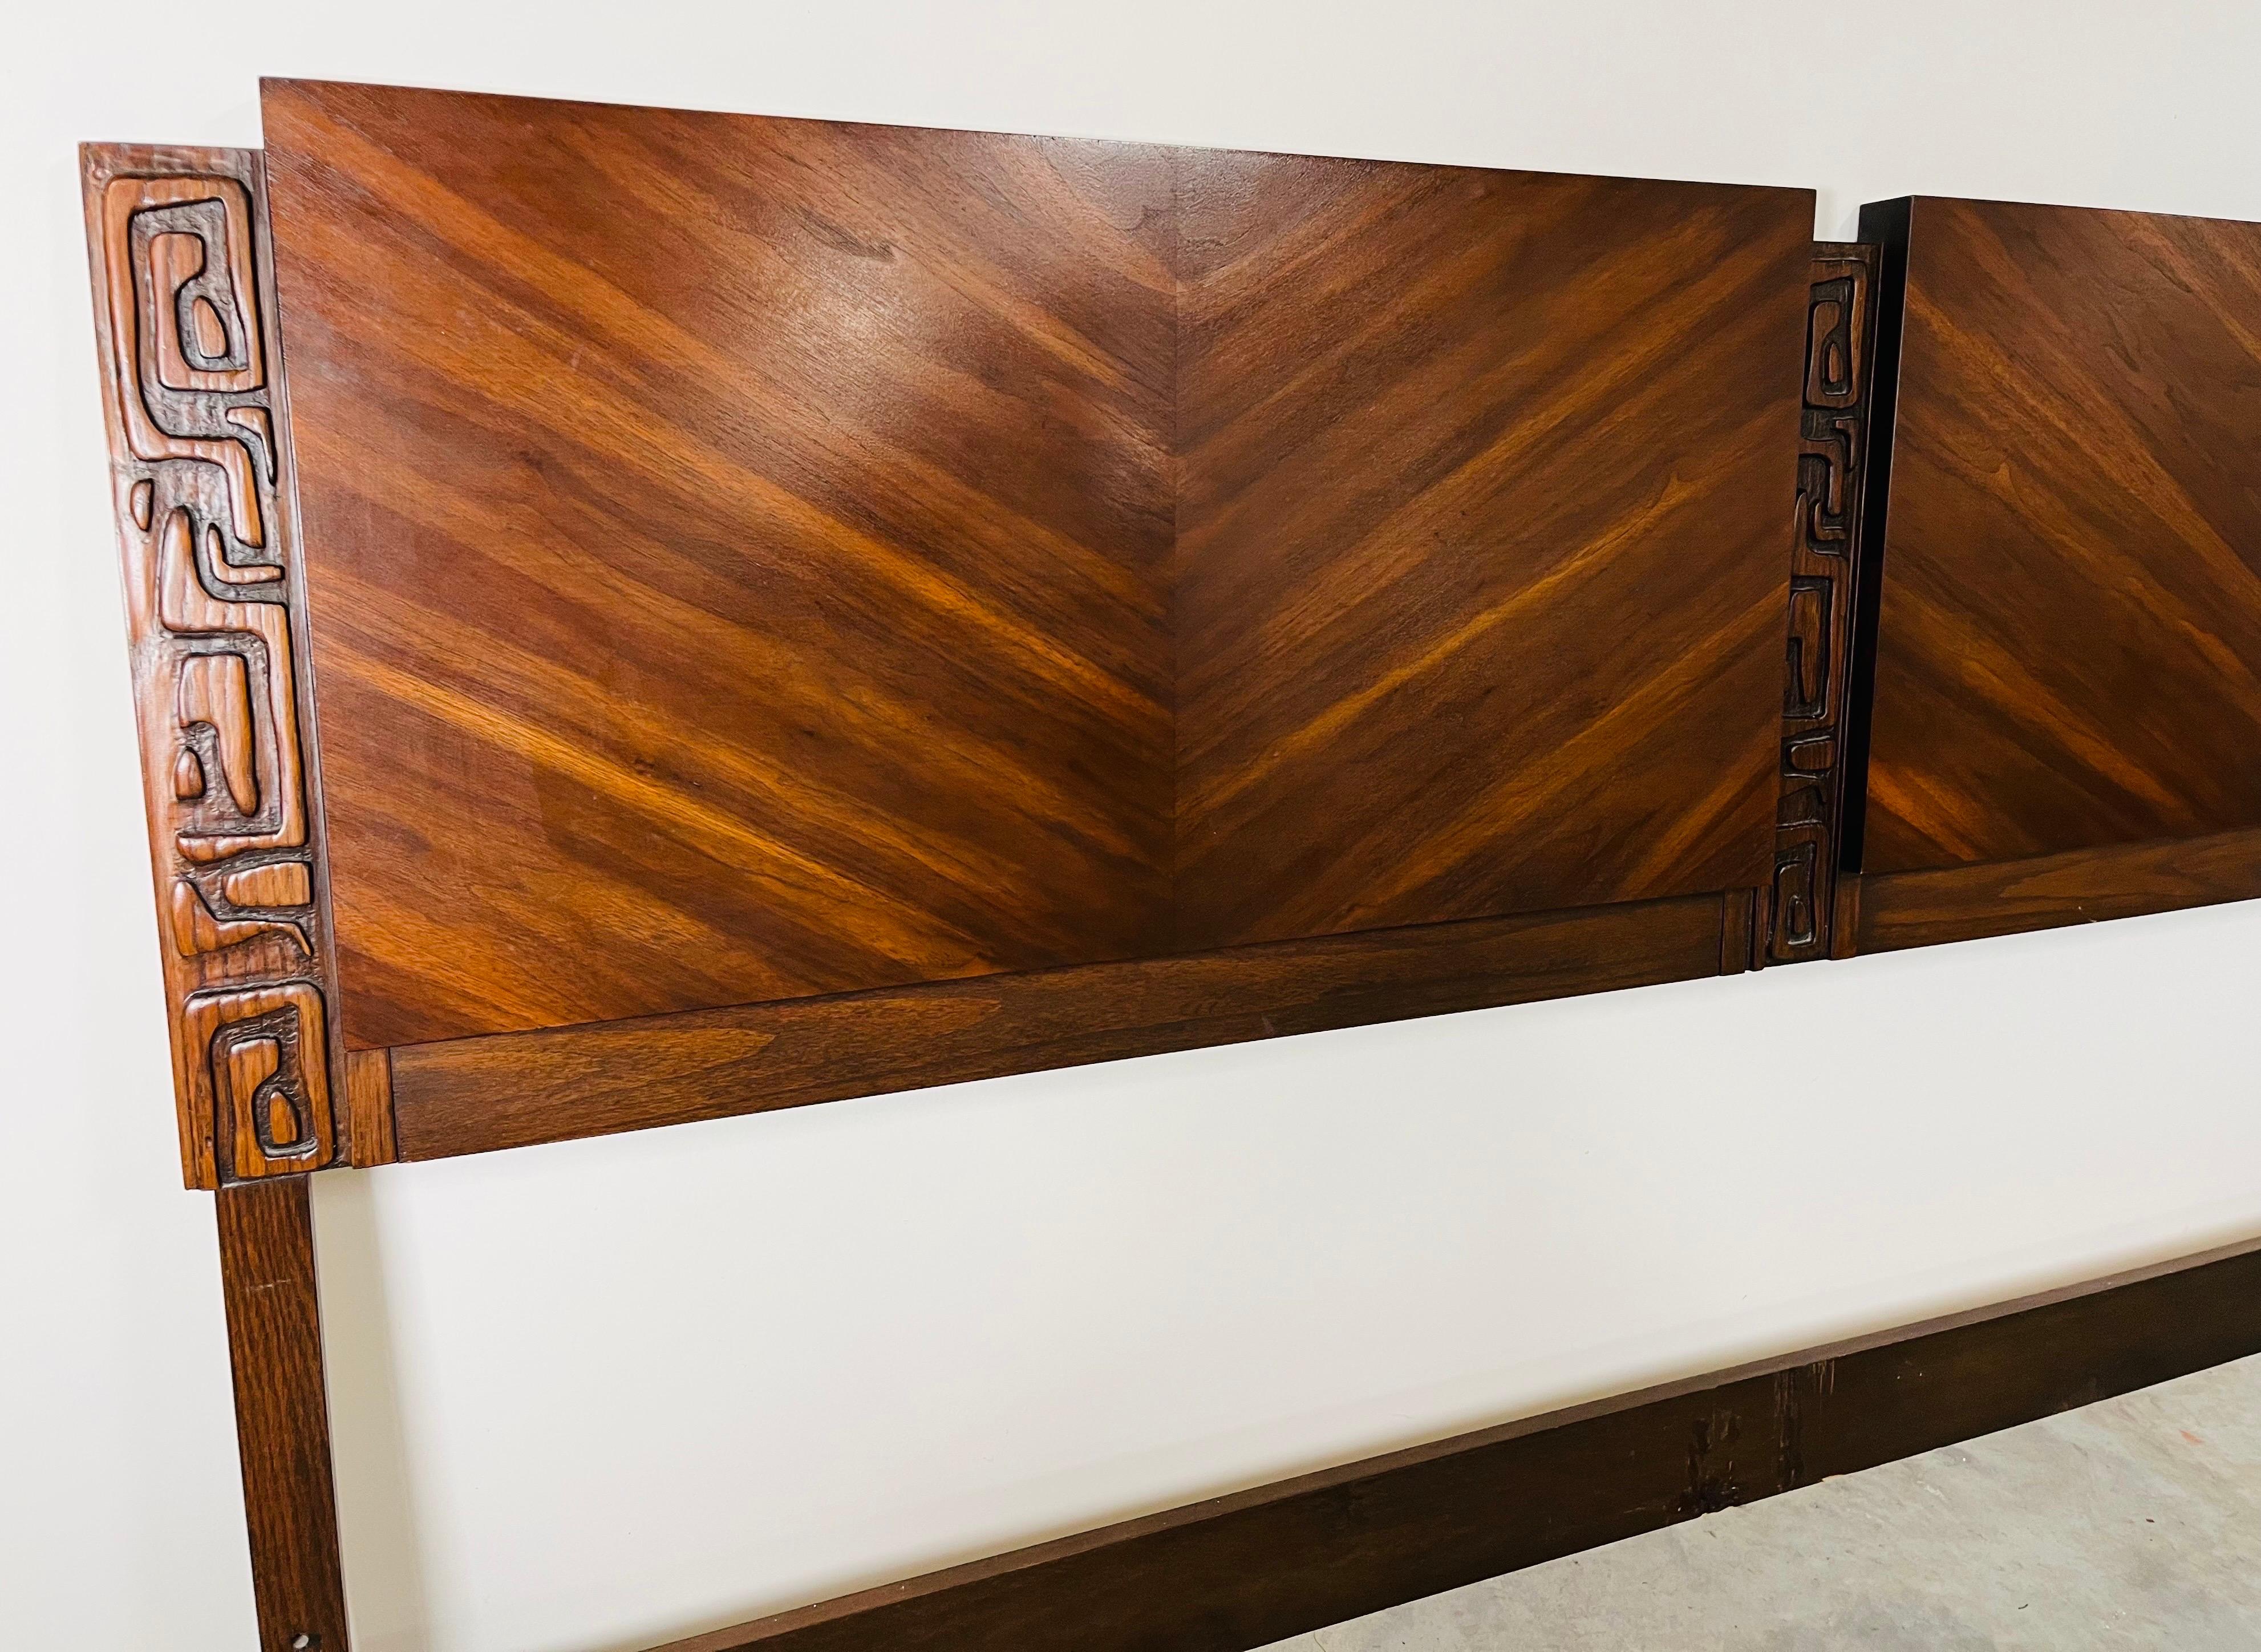 A beautiful Mid-Century modern King size headboard in mahogany having carved tiki patterns that run vertically by United Furniture Co. circa 1960.r In fabulous condition having no damage or scratches. Cleaned and ready for use. 
42.25x80x2” HWD